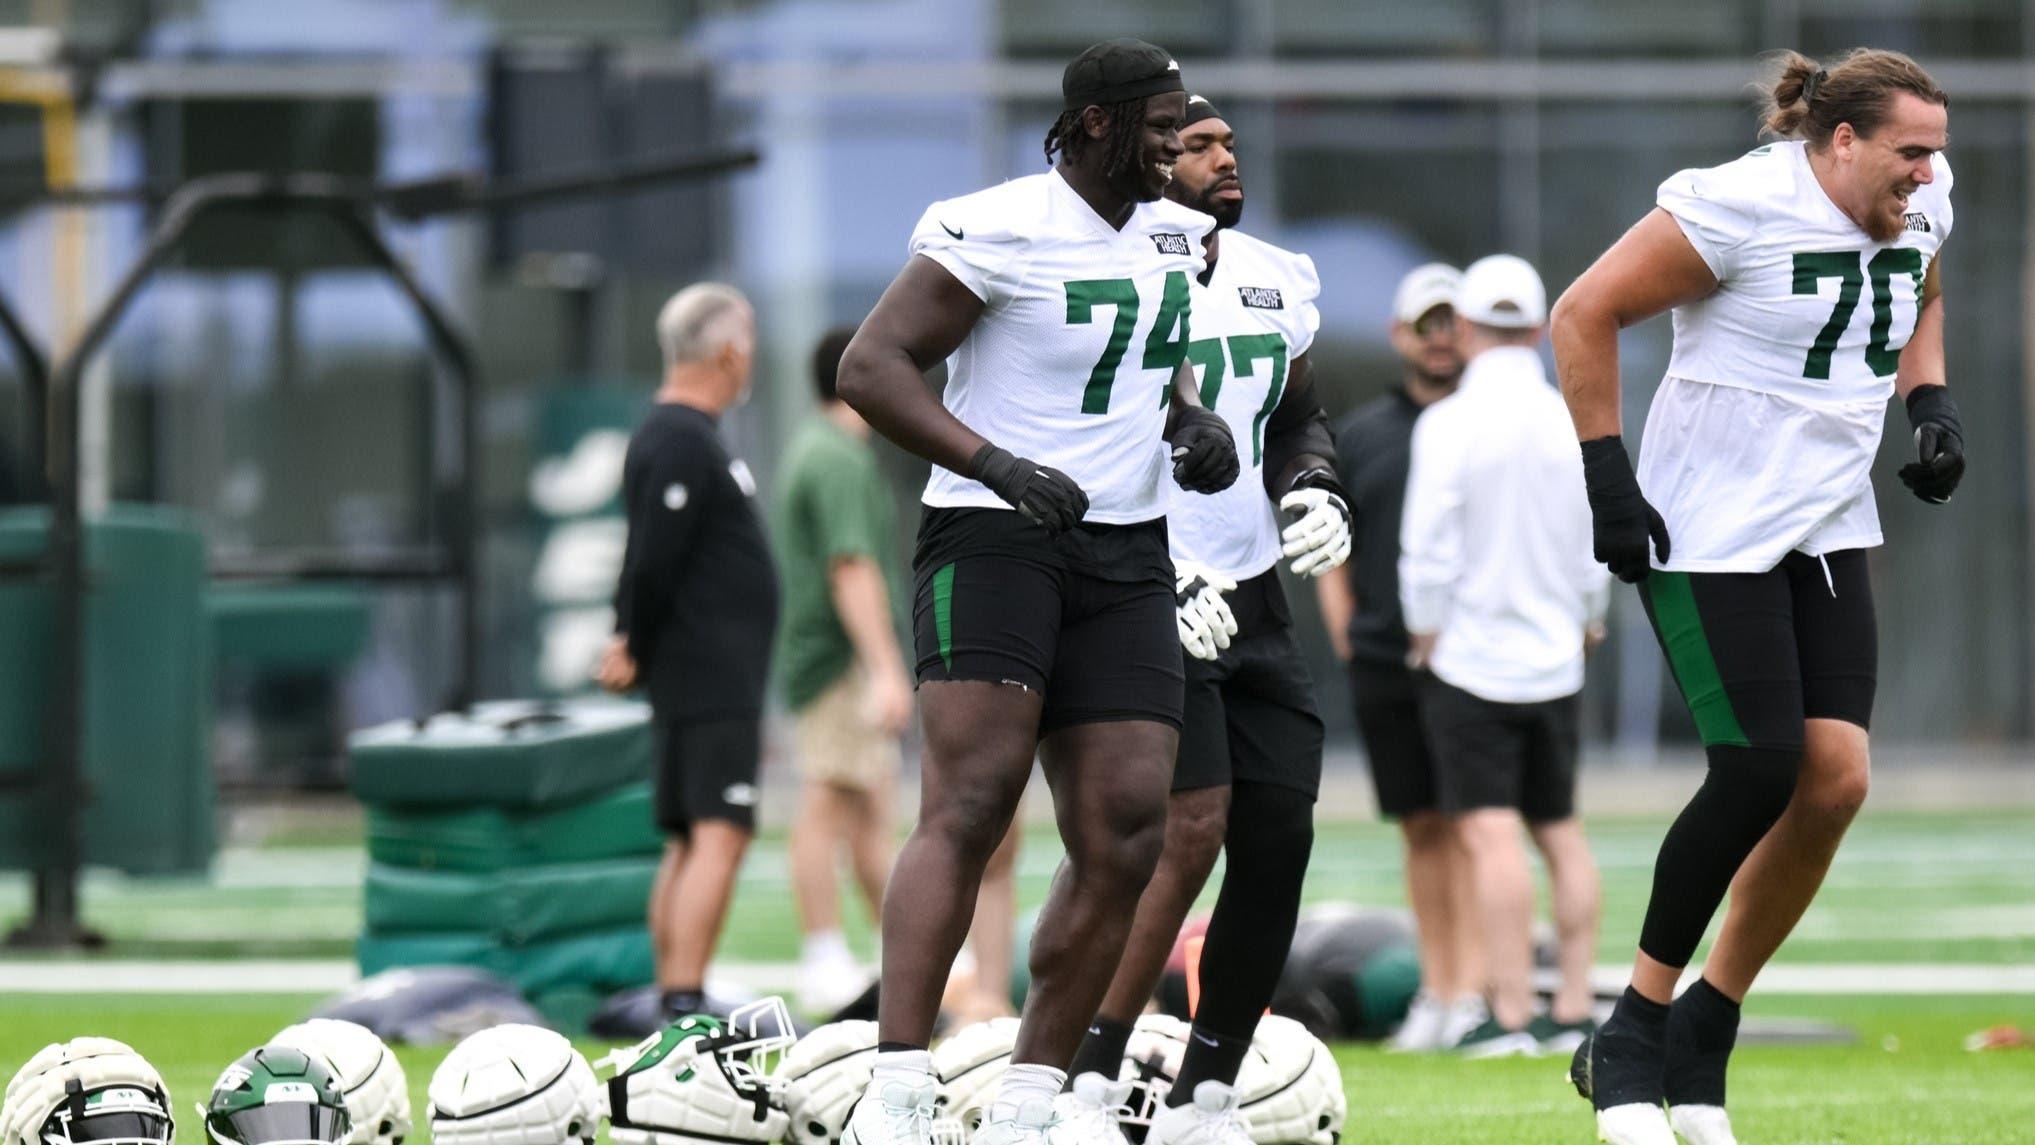 Jets first-round pick Olu Fashanu impressing in training camp: ‘Definitely did not miss on that kid’